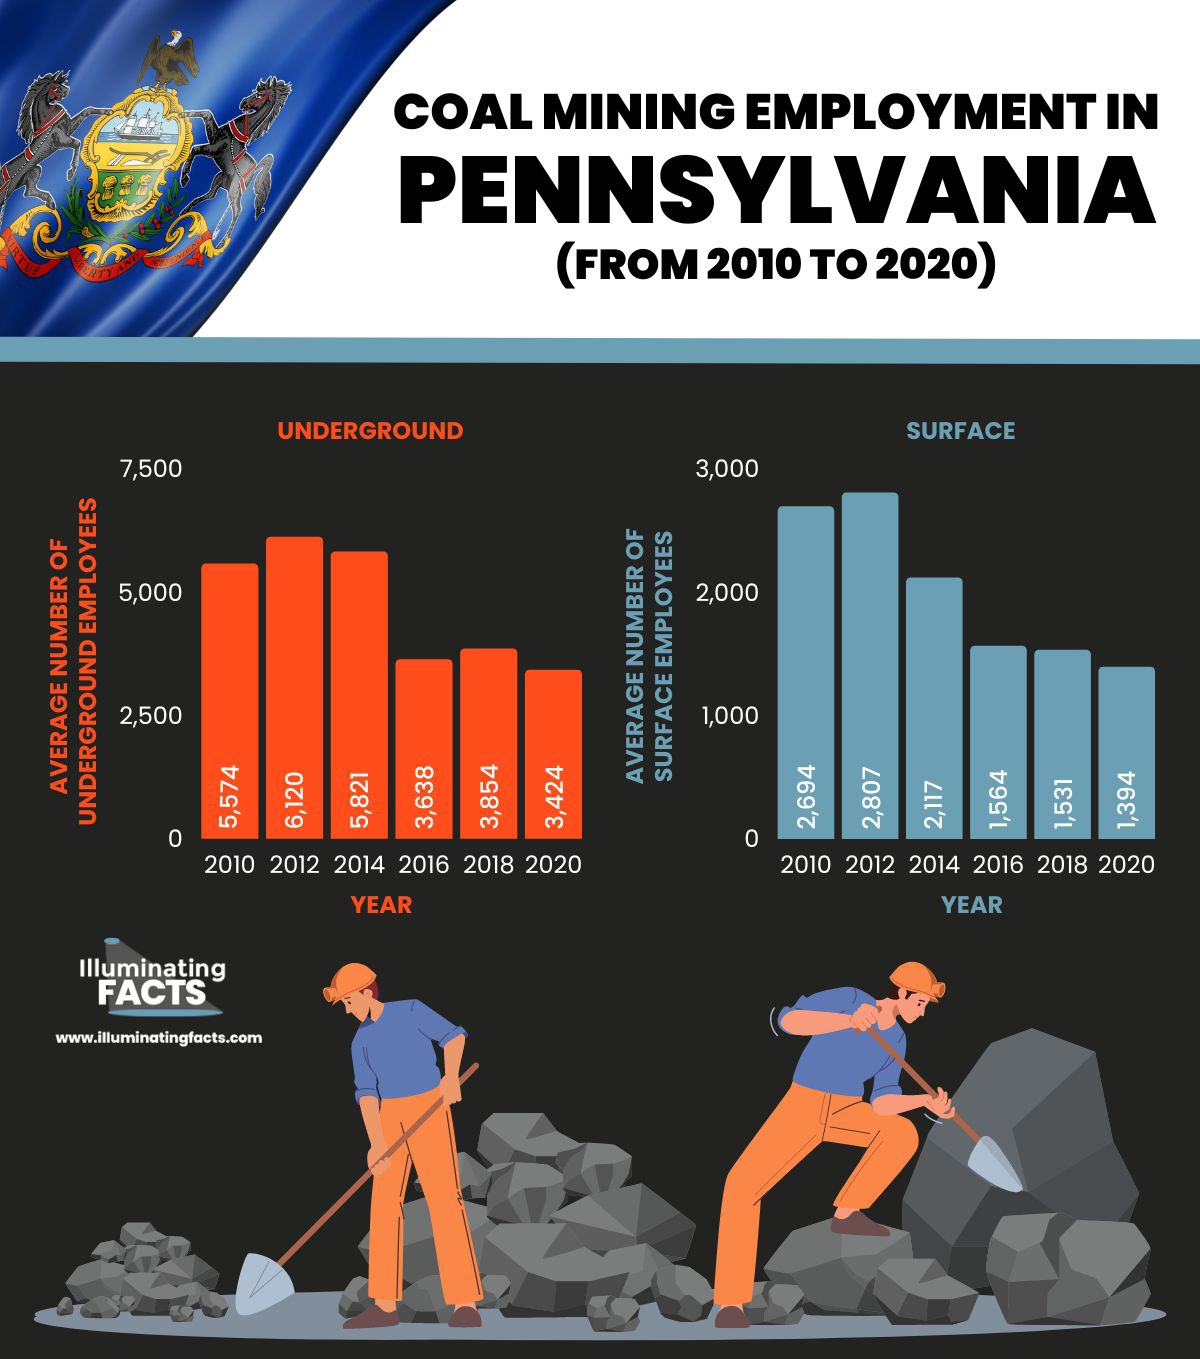 Coal mining employment in Pennsylvania from 2010 to 2020